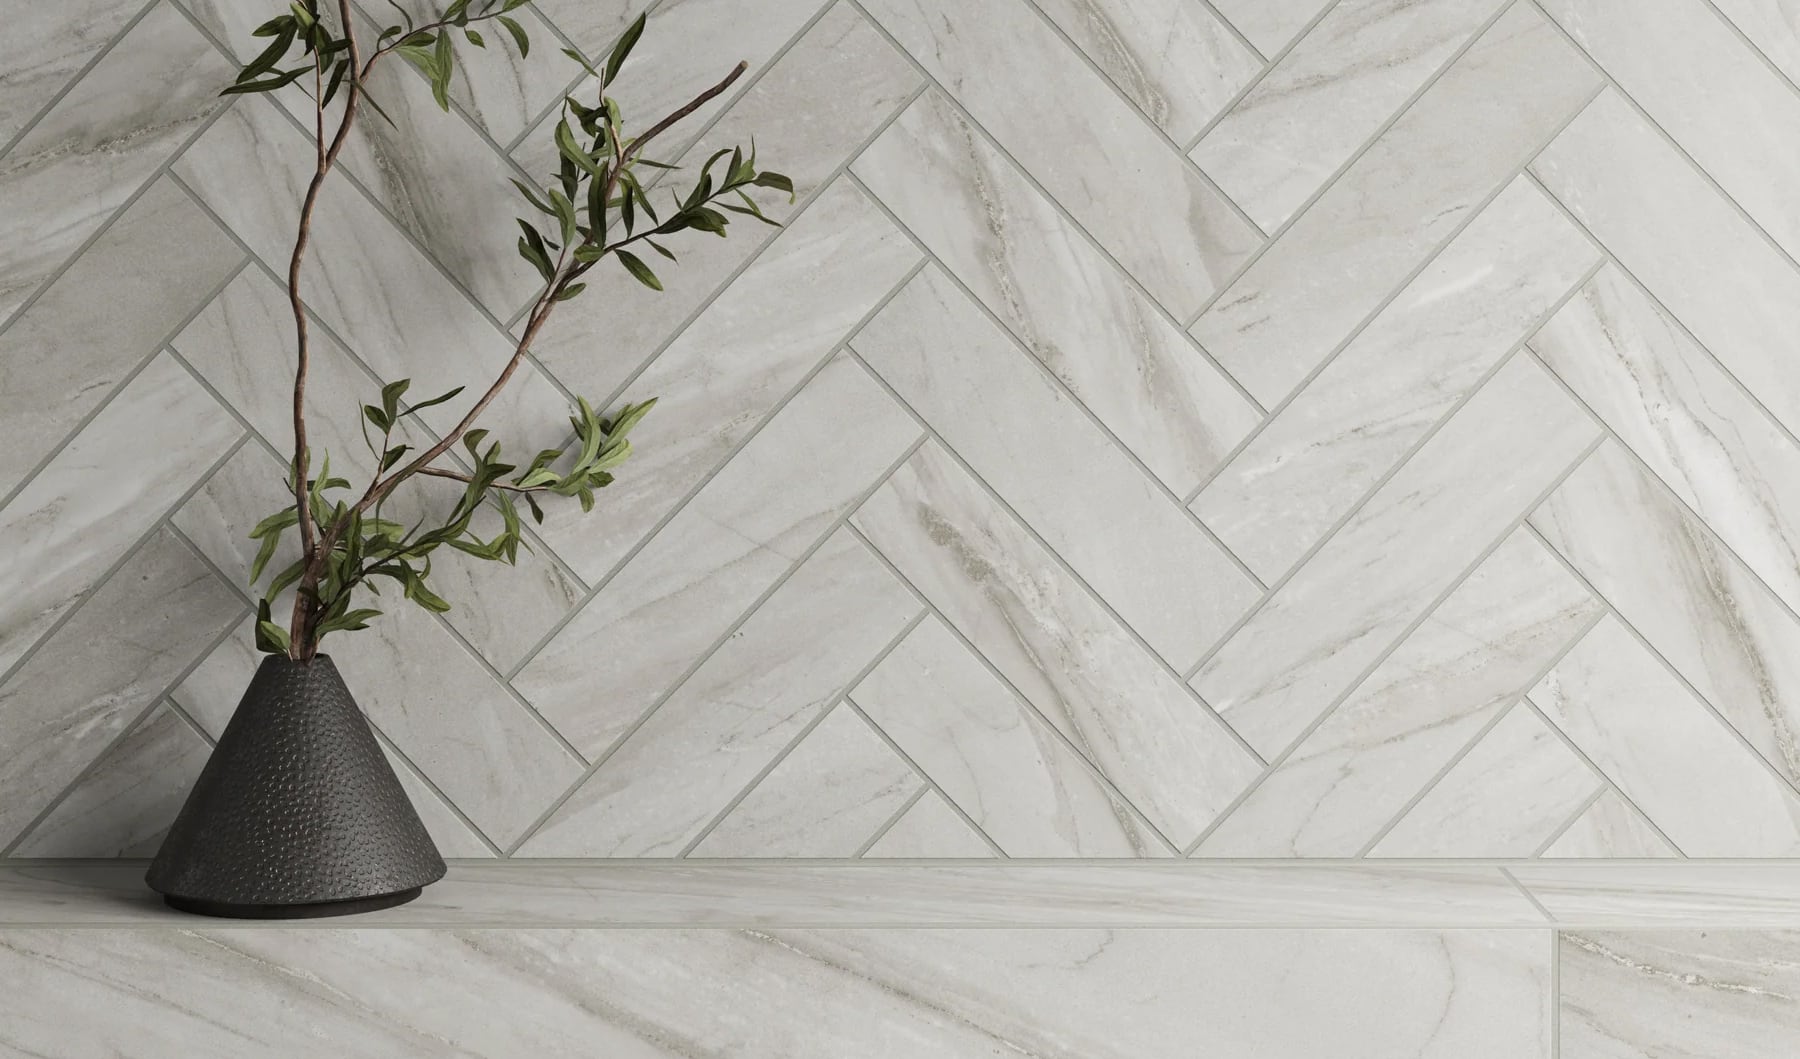 Chic light grey tile in a herringbone design adds a touch of sophistication to this minimalist space